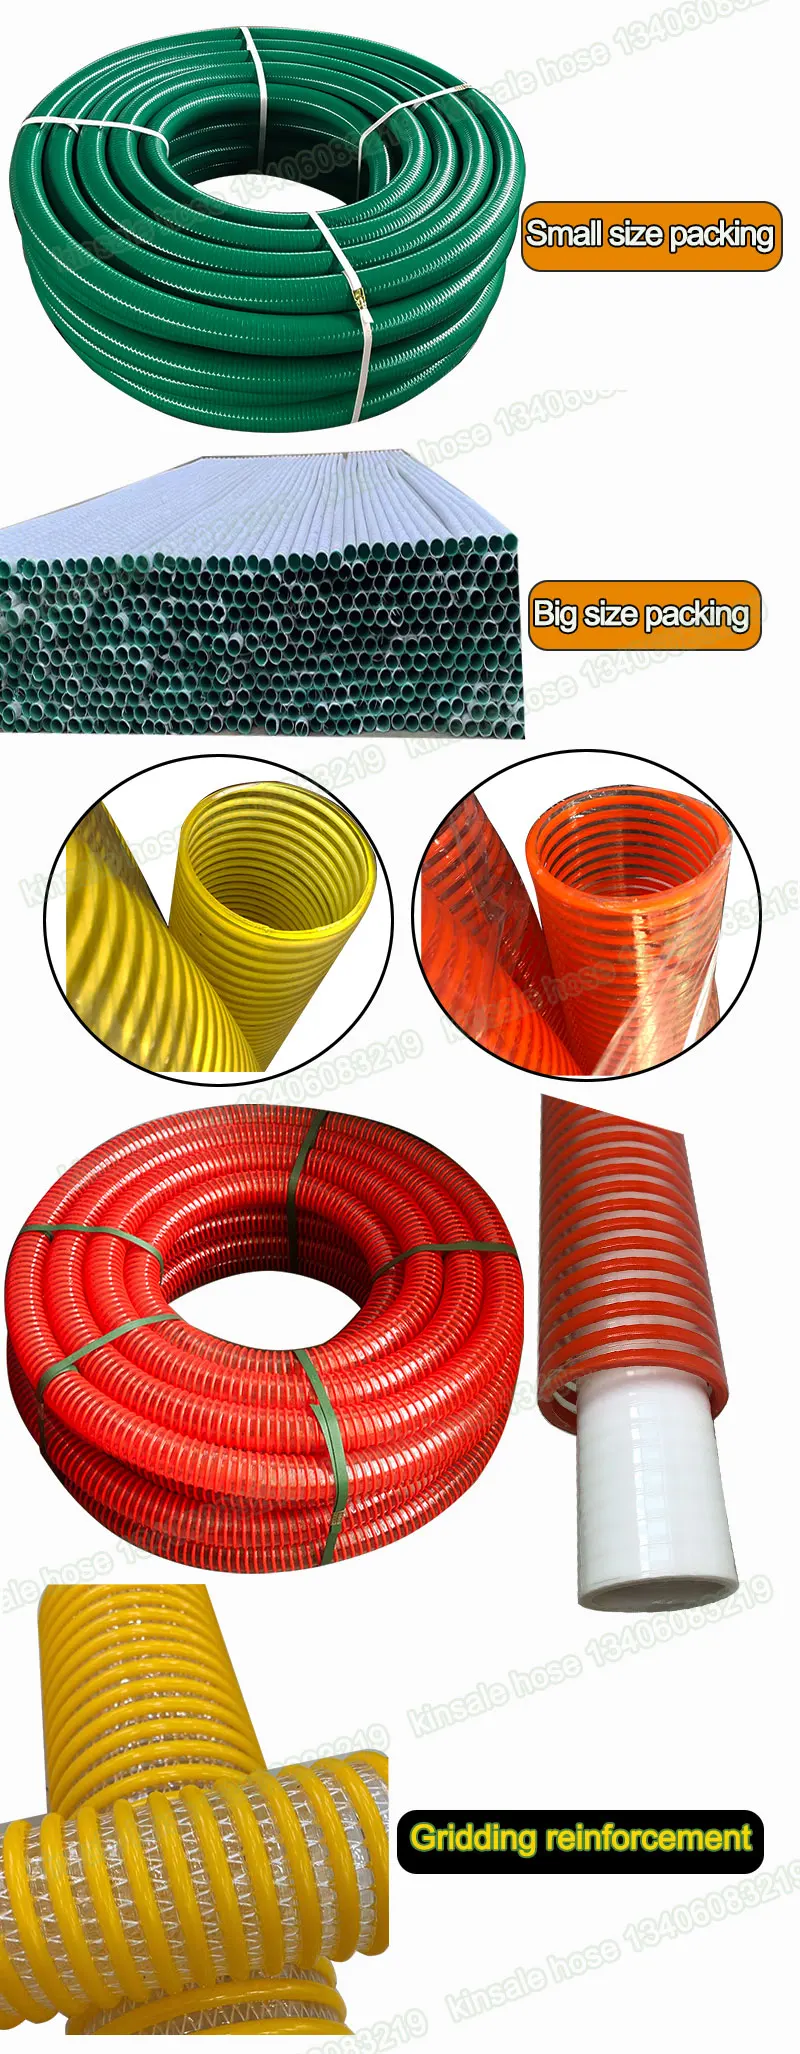 Reinforced! 3" Vacuum Tube Pipe 10M 1" PVC Suction / Delivery Hose 